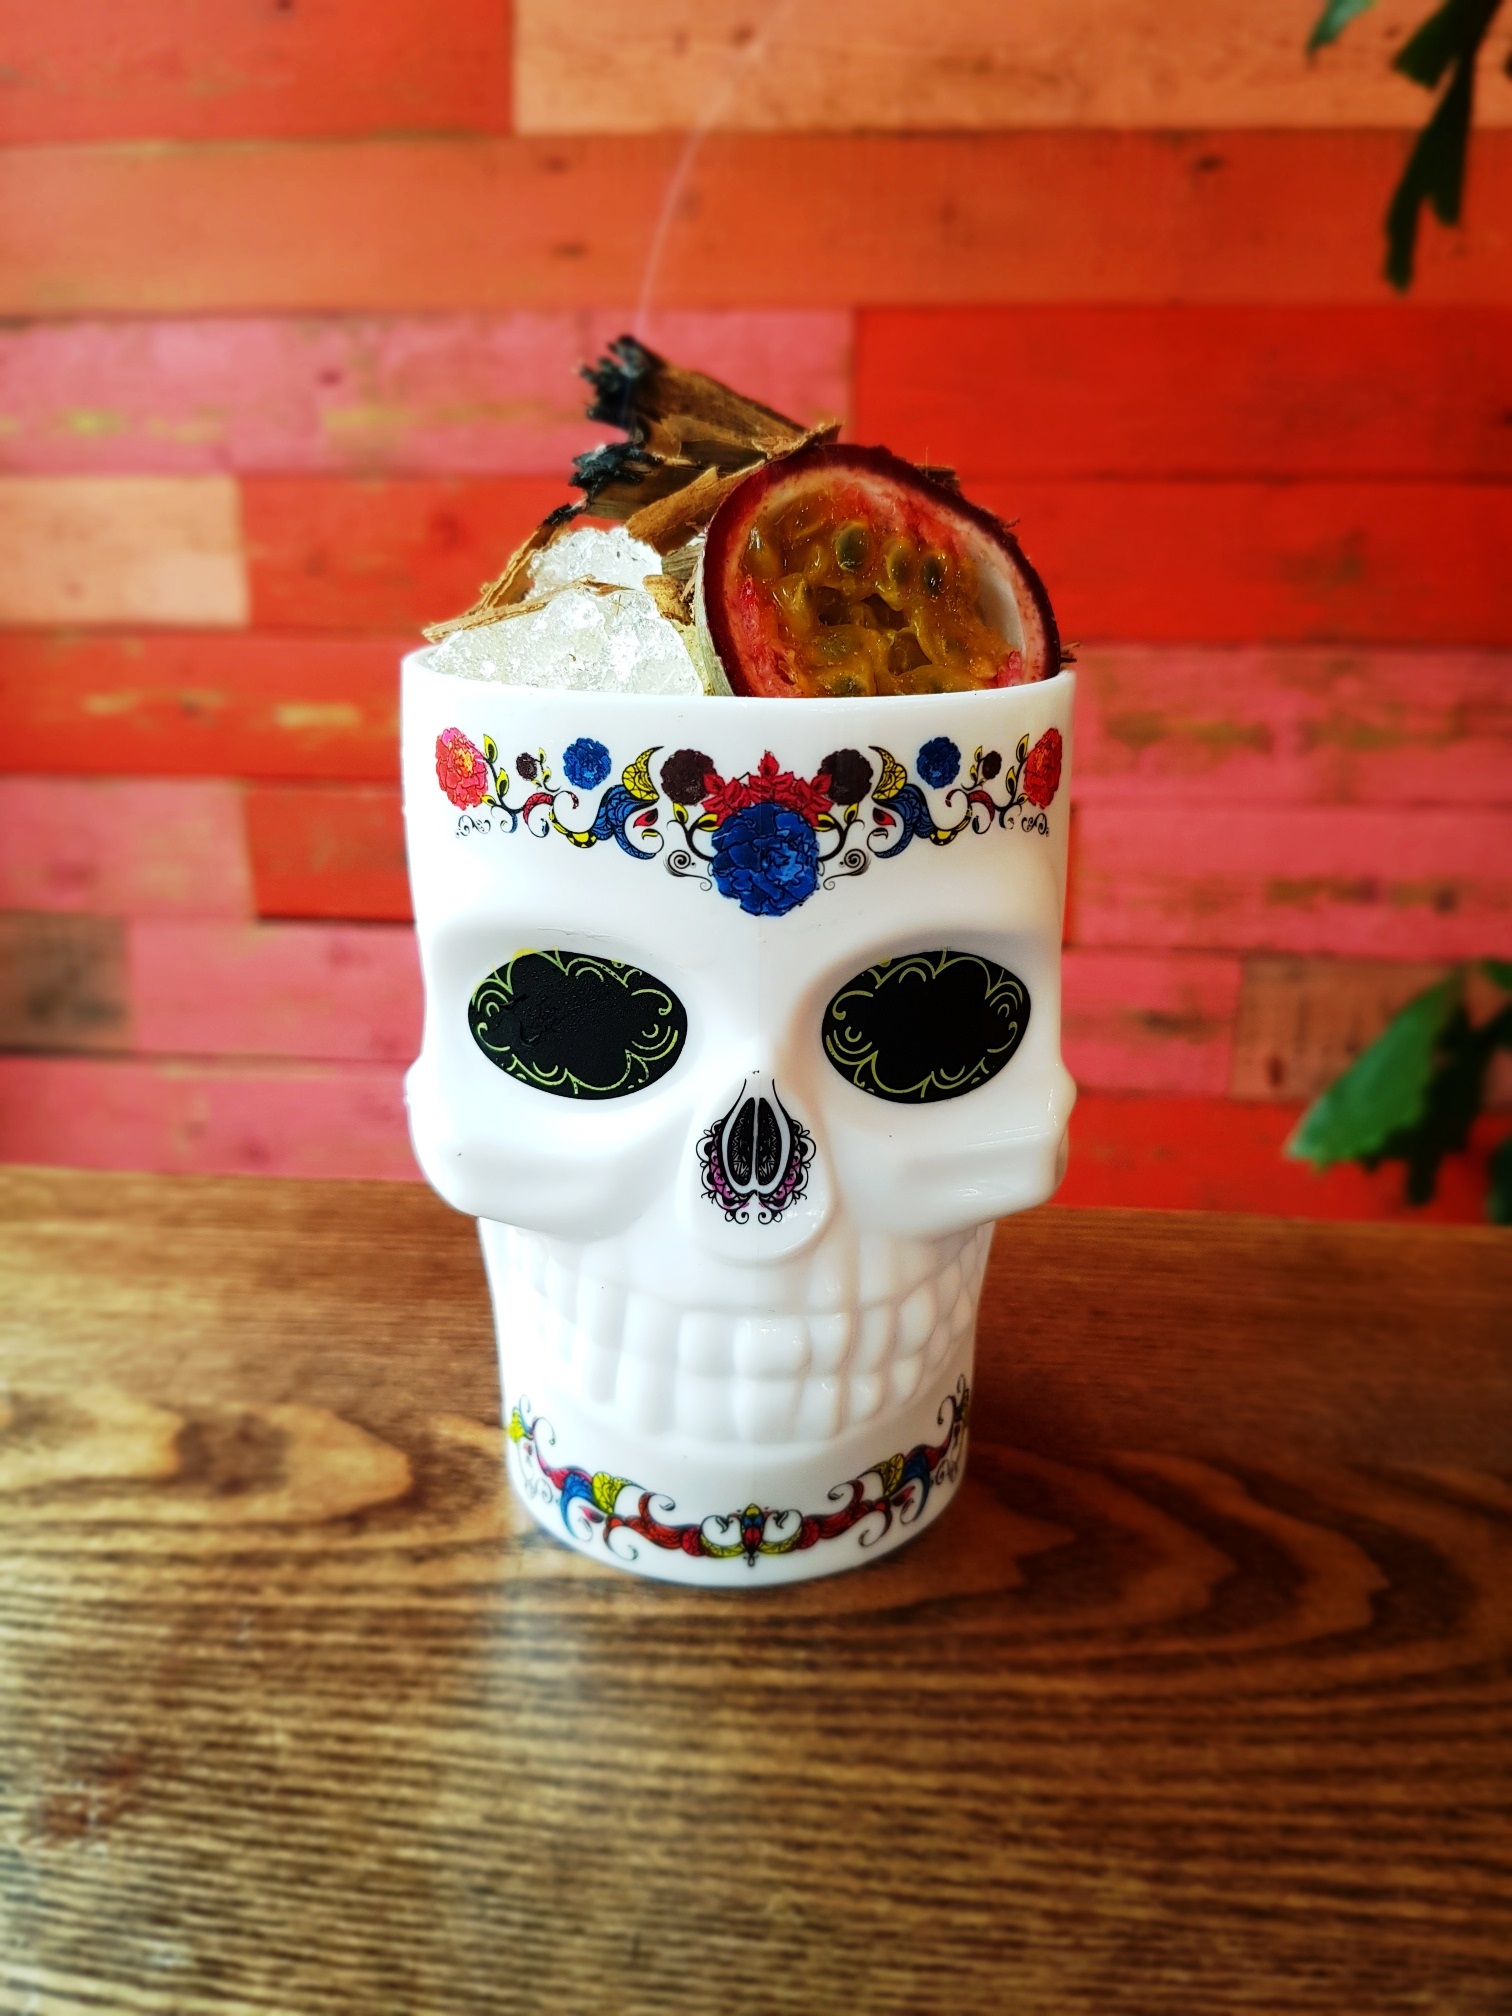 SPOOKY TREATS AT LAS IGUANAS FOR HALLOWEEN  DAY OF THE DEAD